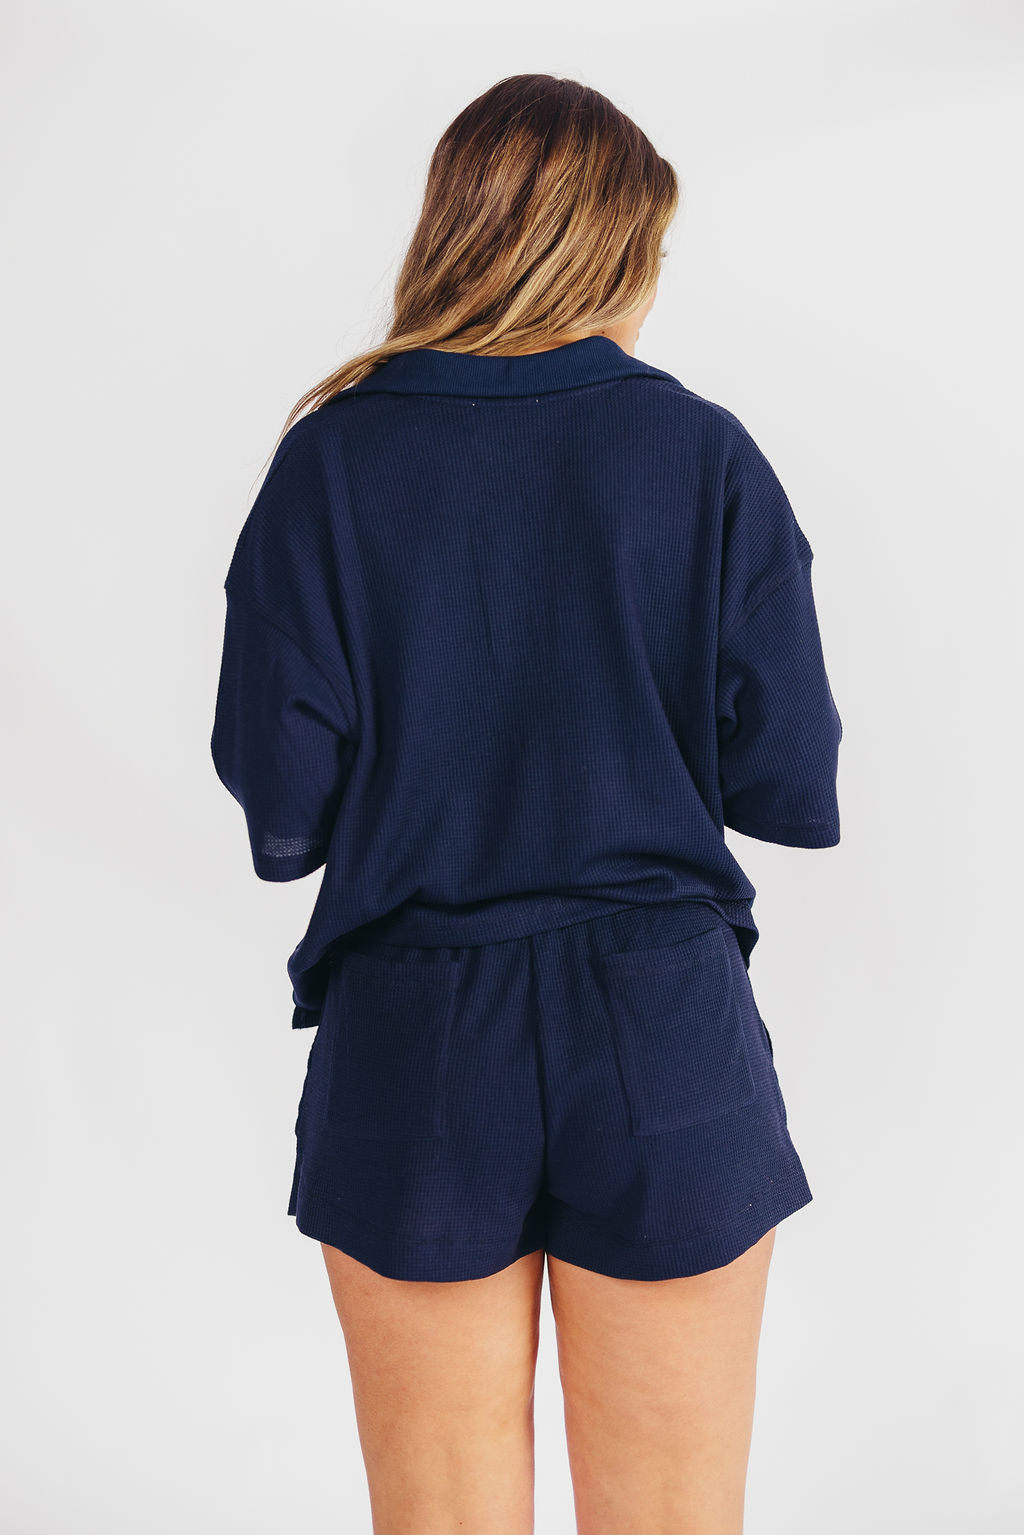 Leanna Knit Shorts in Navy (top sold separately)